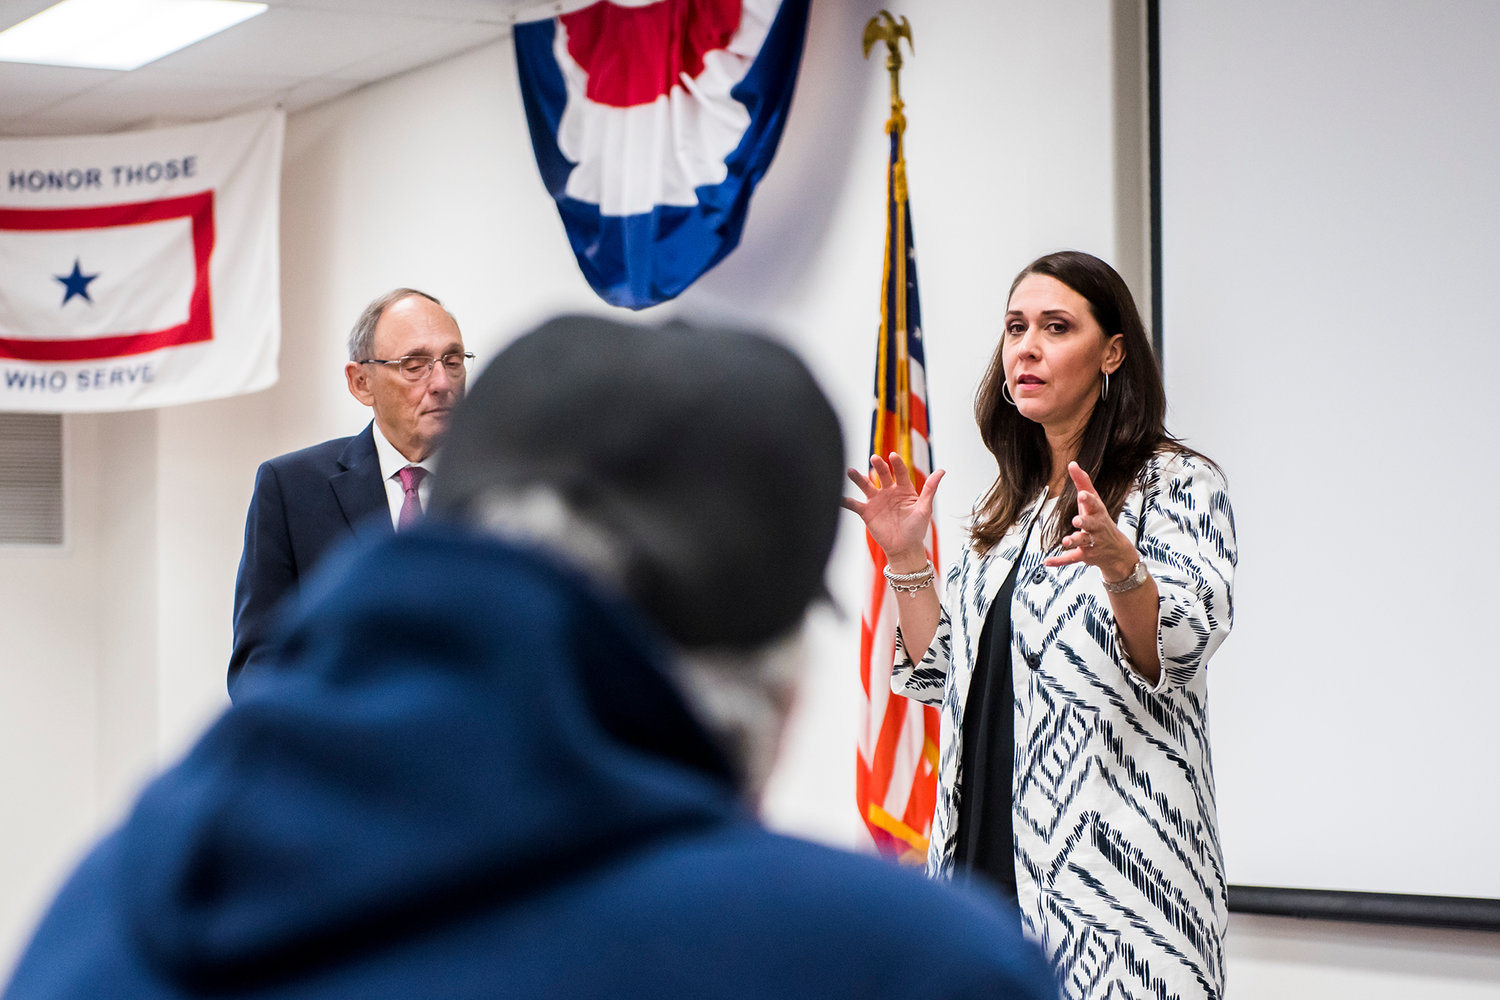 Representative Phil Roe, left, of Tennessee, and Jaime Herrera Beutler, right, talk about medical marijuana during a public meeting at the Chehalis Veterans Memorial Museum.